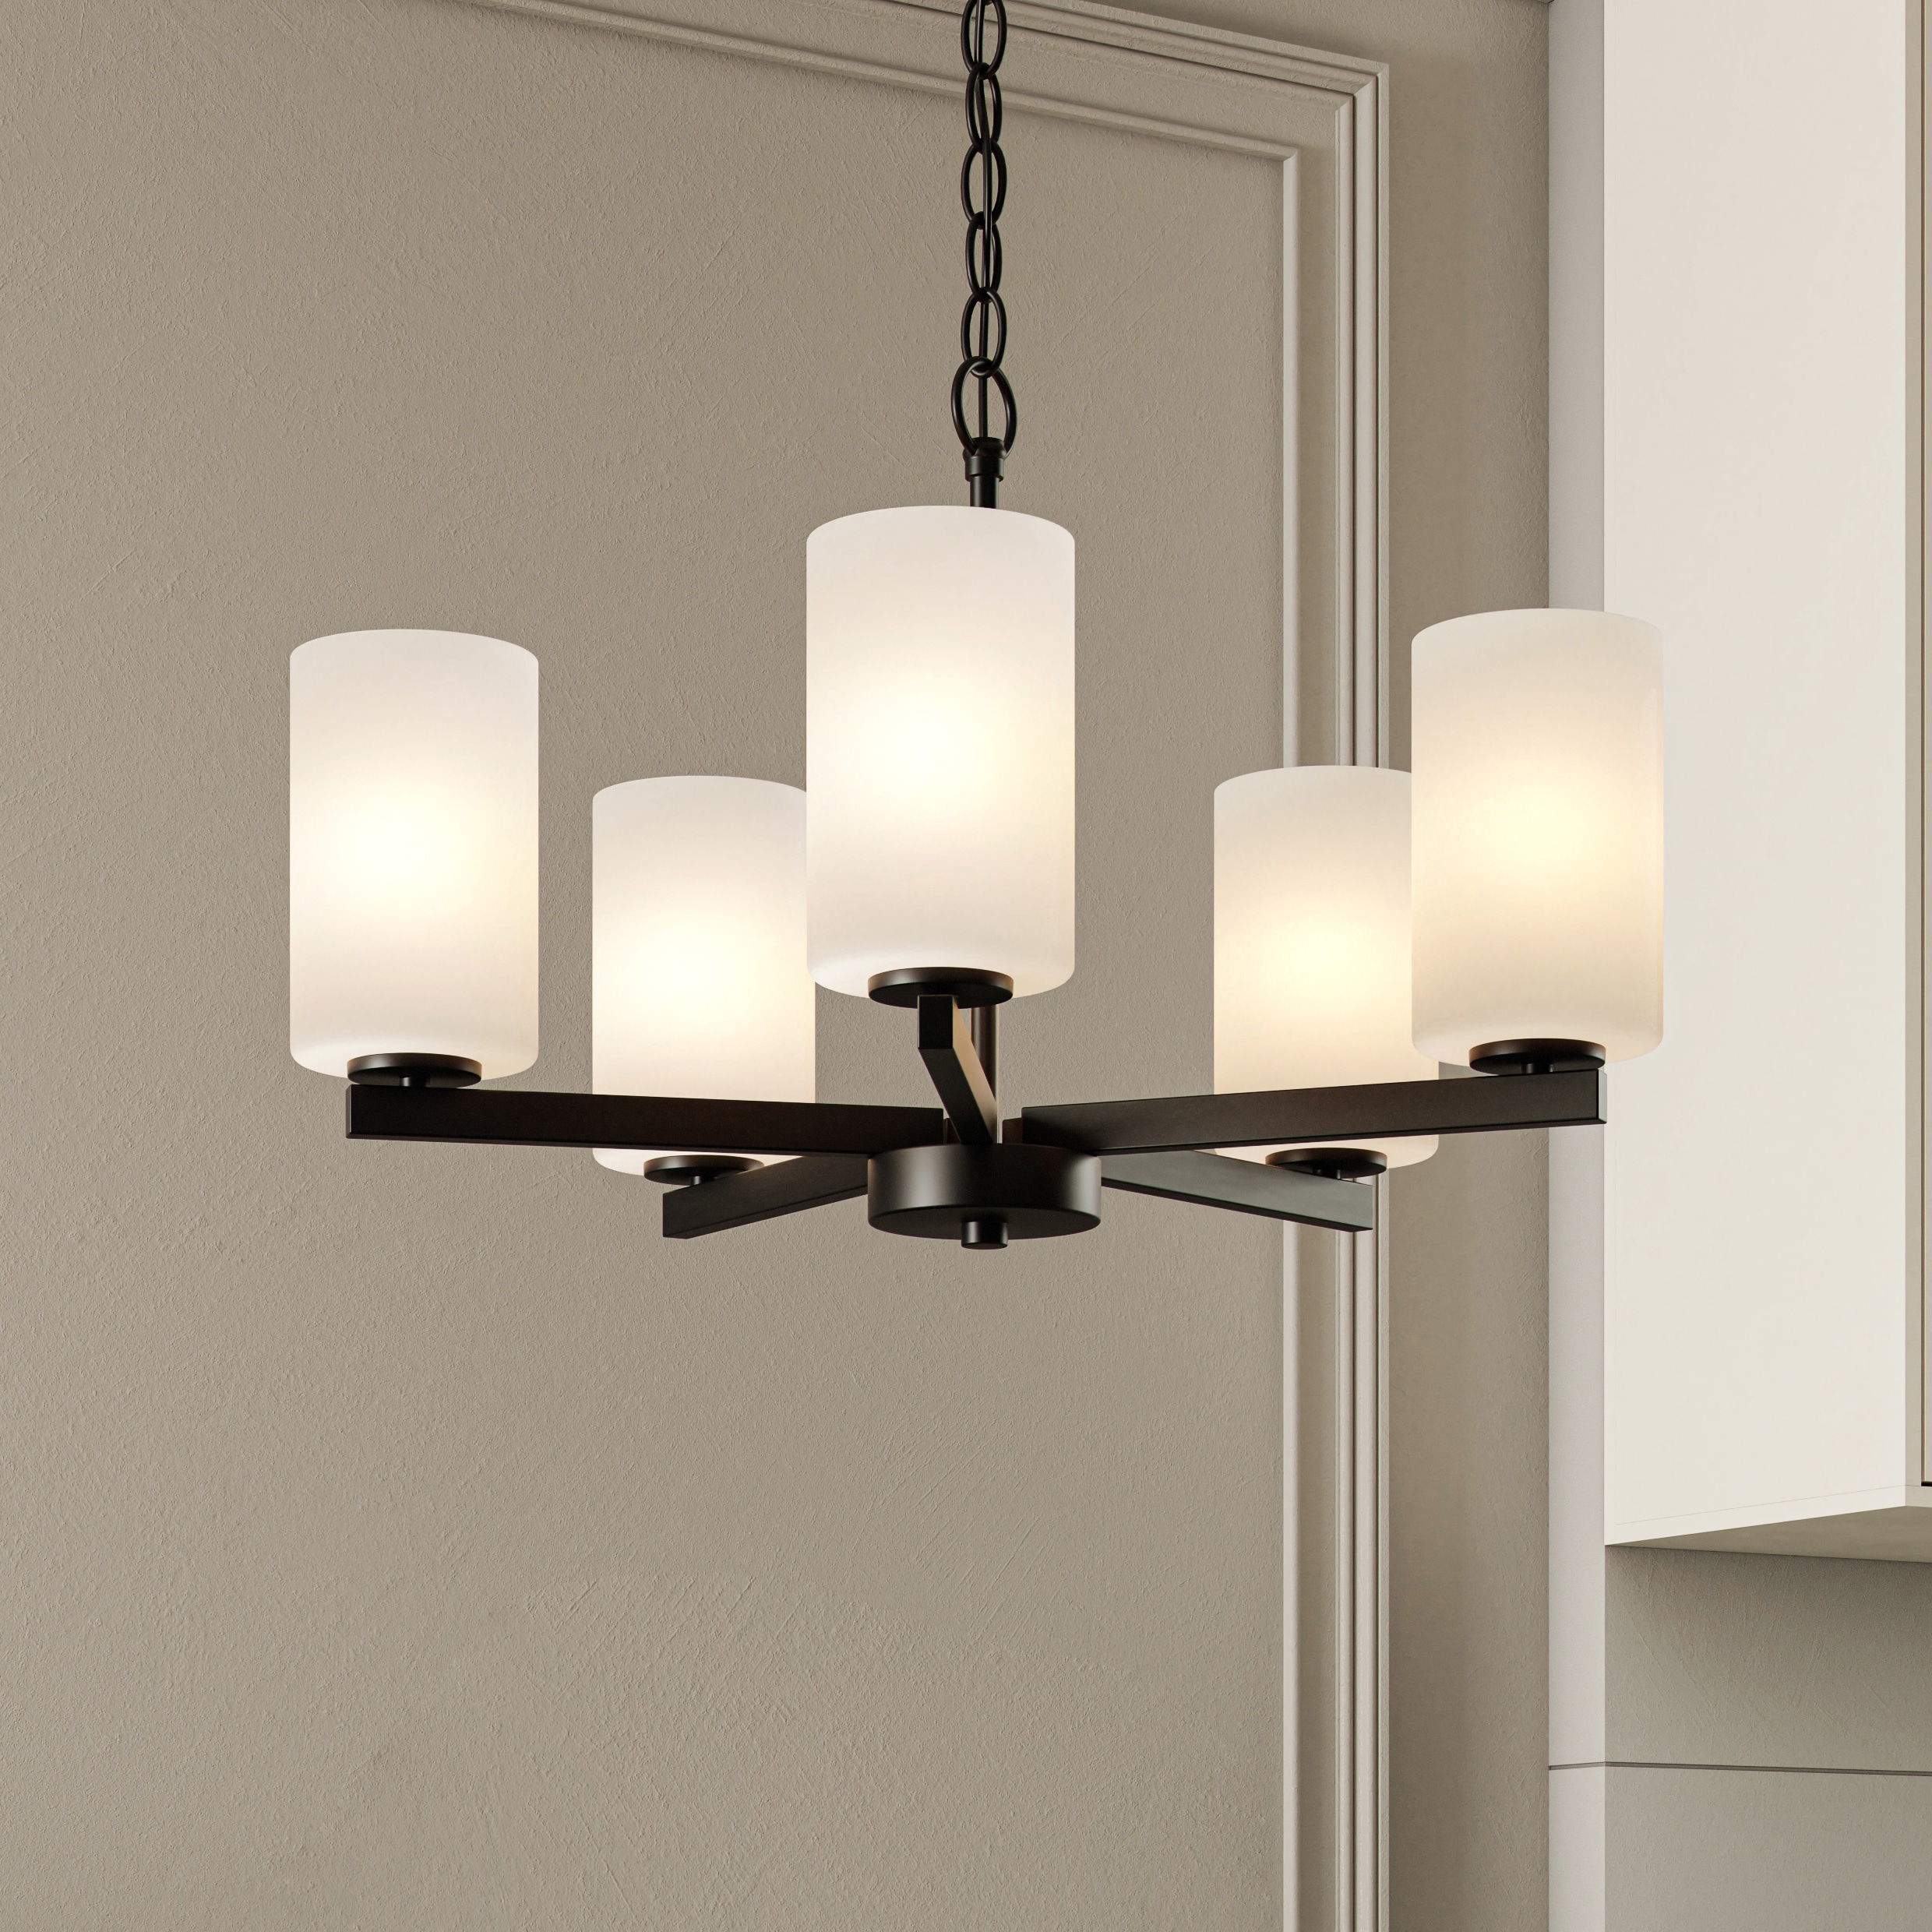 Opal glass Bright White Lighting & Ceiling Fans at Lowes.com